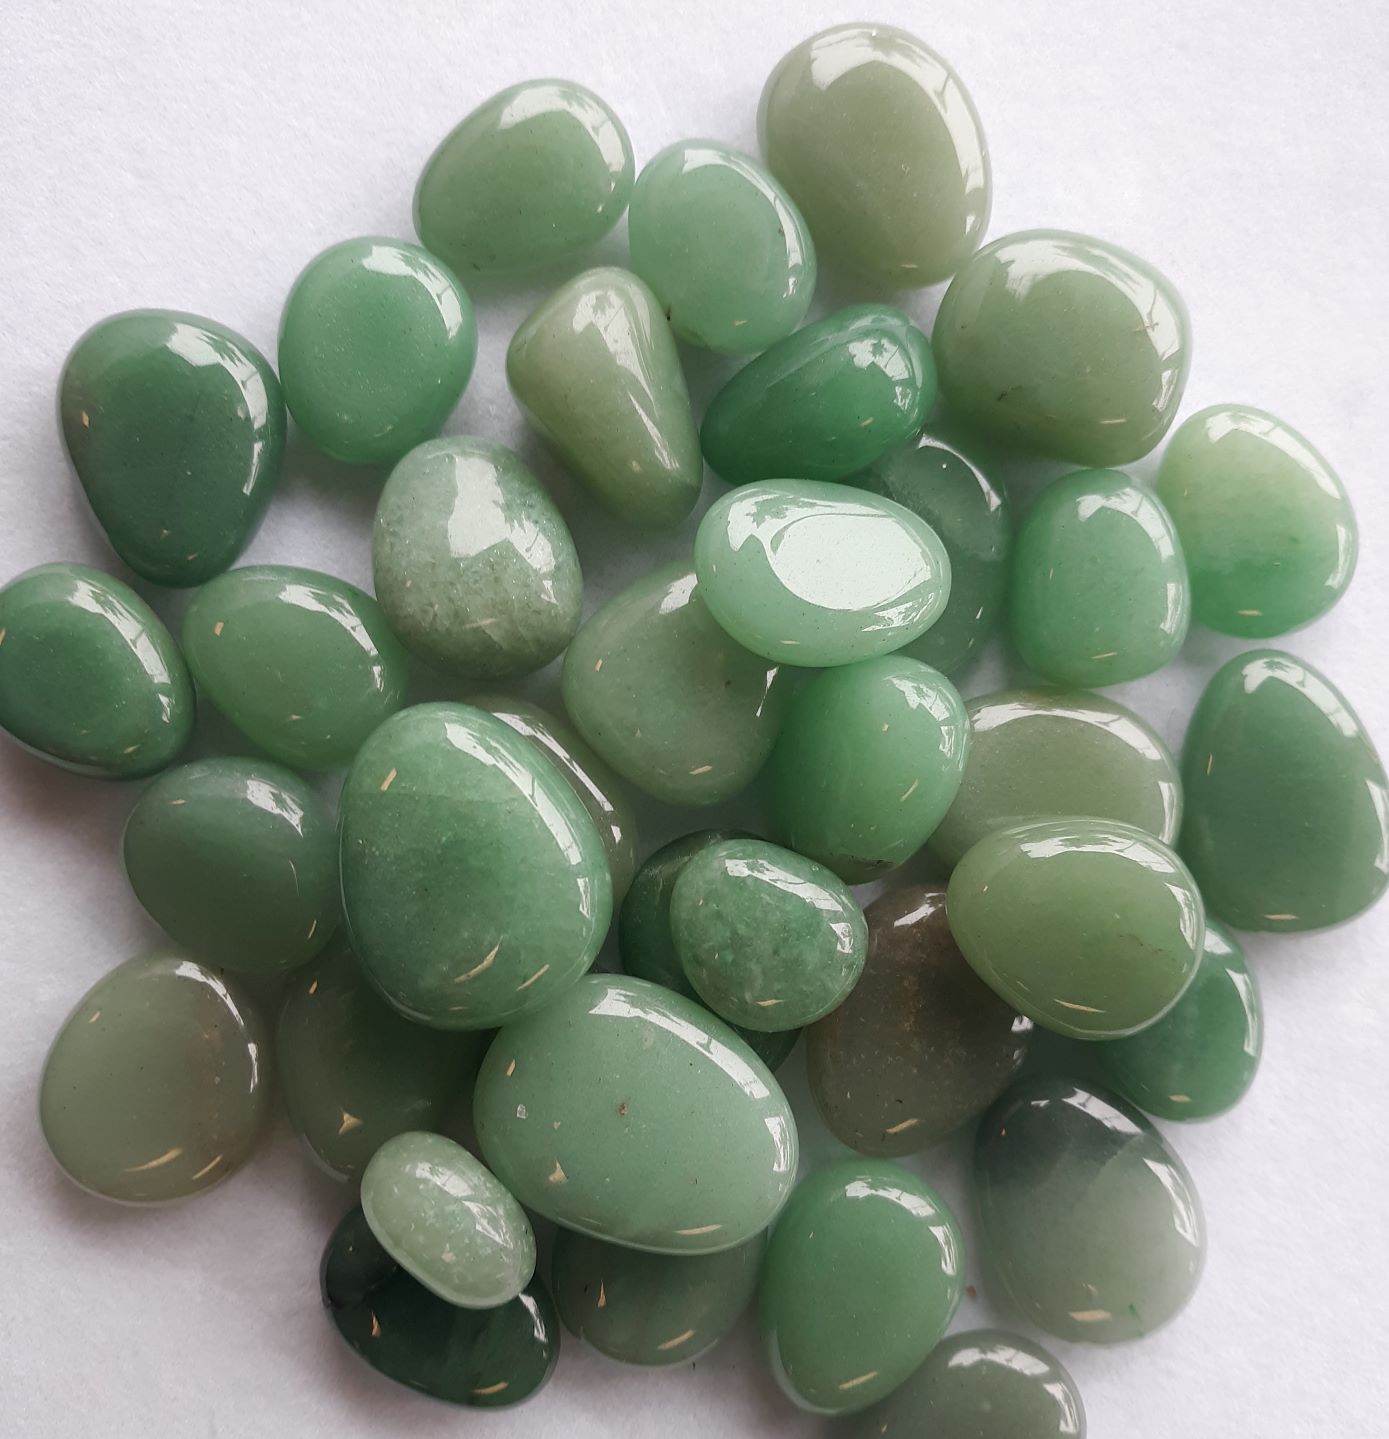 Green Aventurine tumbled stones | The Twisted Bead & Rock Shop